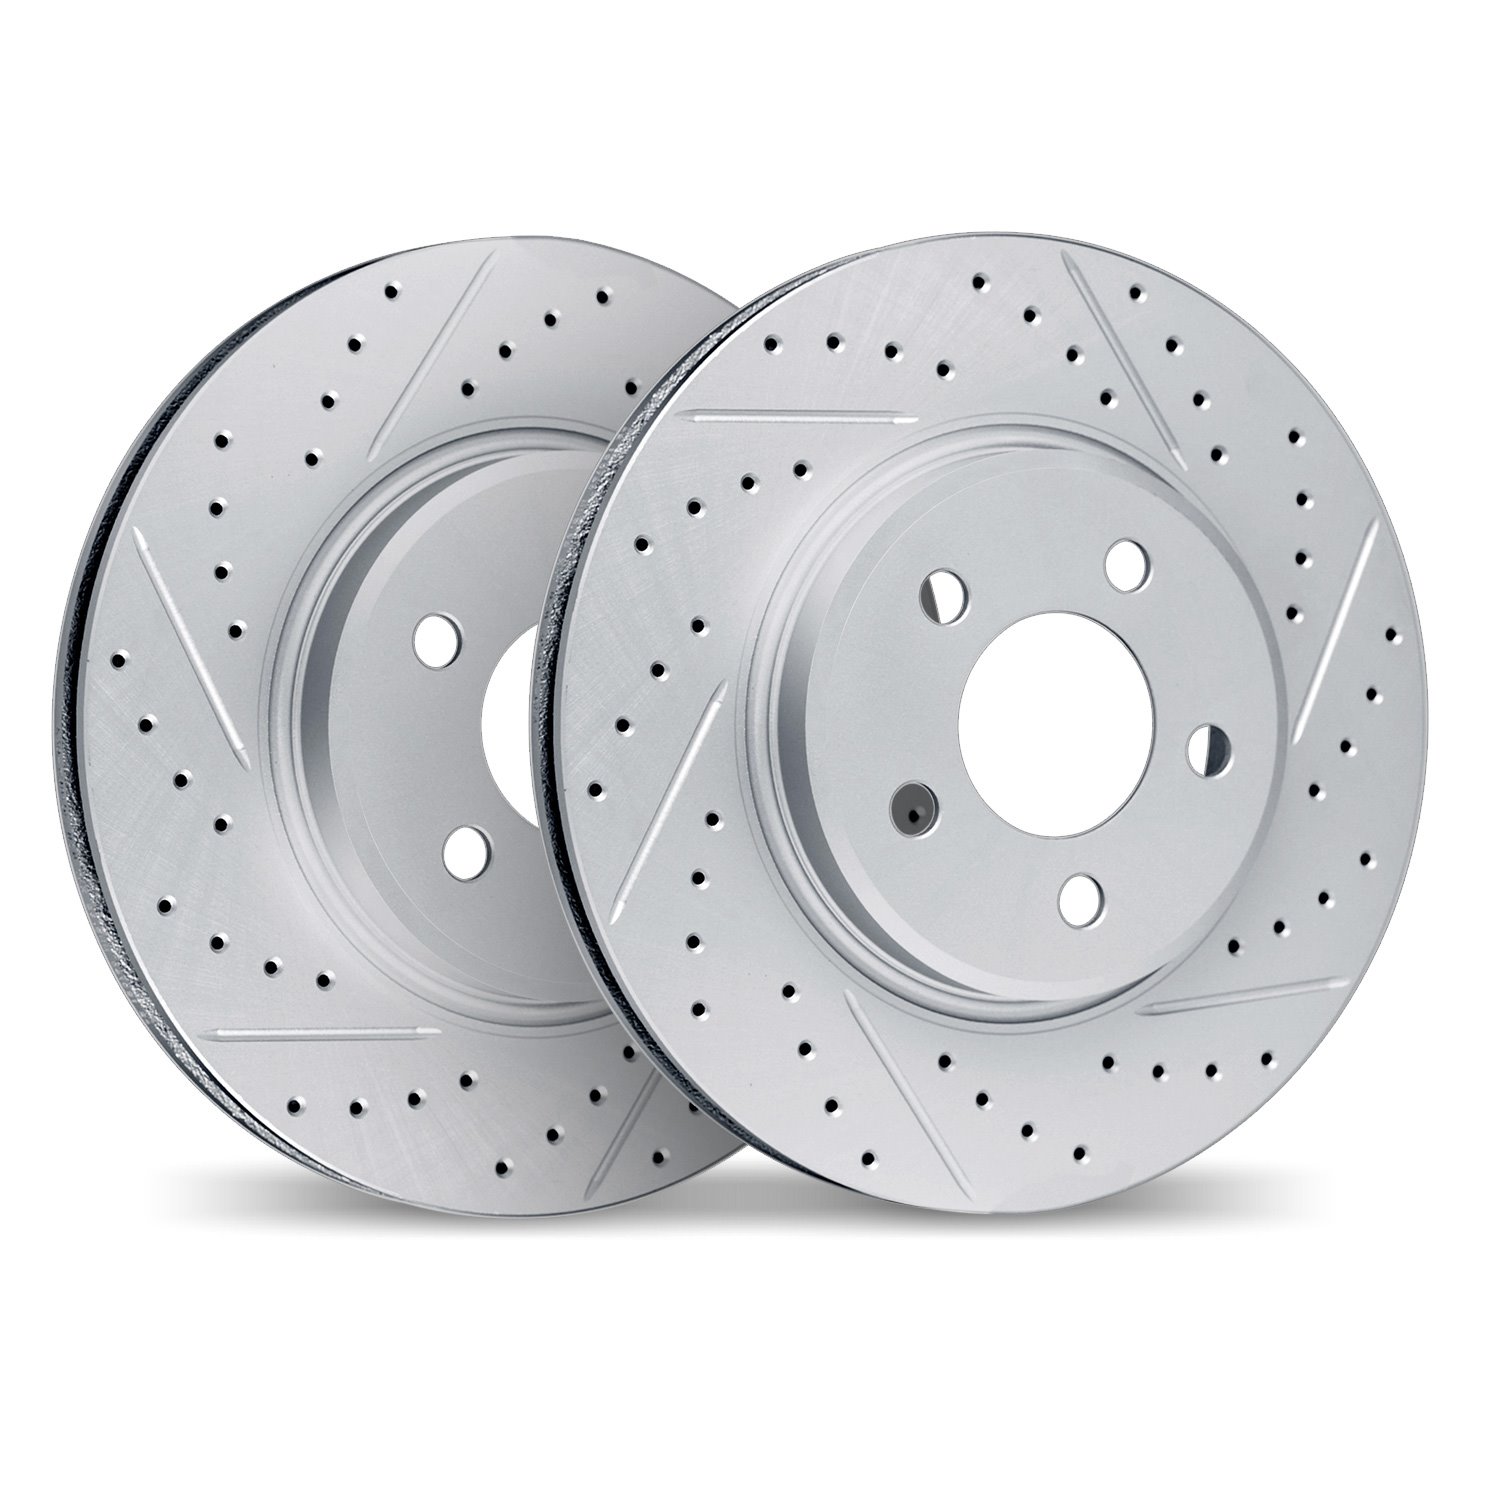 2002-31035 Geoperformance Drilled/Slotted Brake Rotors, 2014-2021 BMW, Position: Front